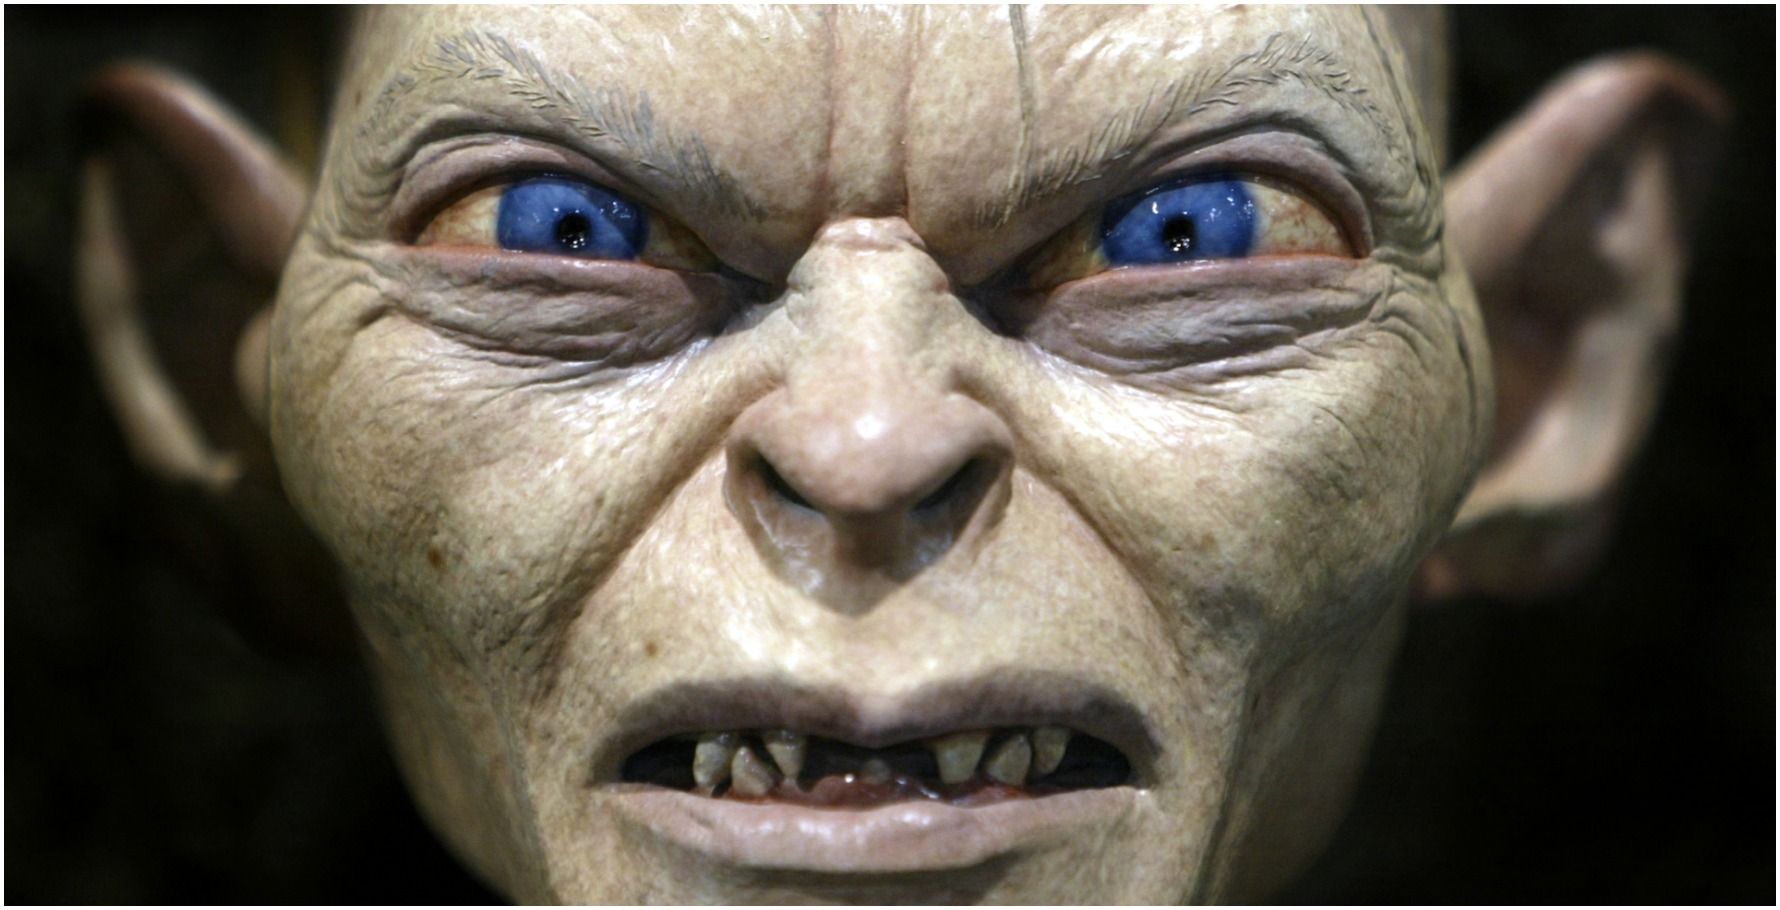 Is 'The Lord of the Rings: Gollum' Actually Coming Out?